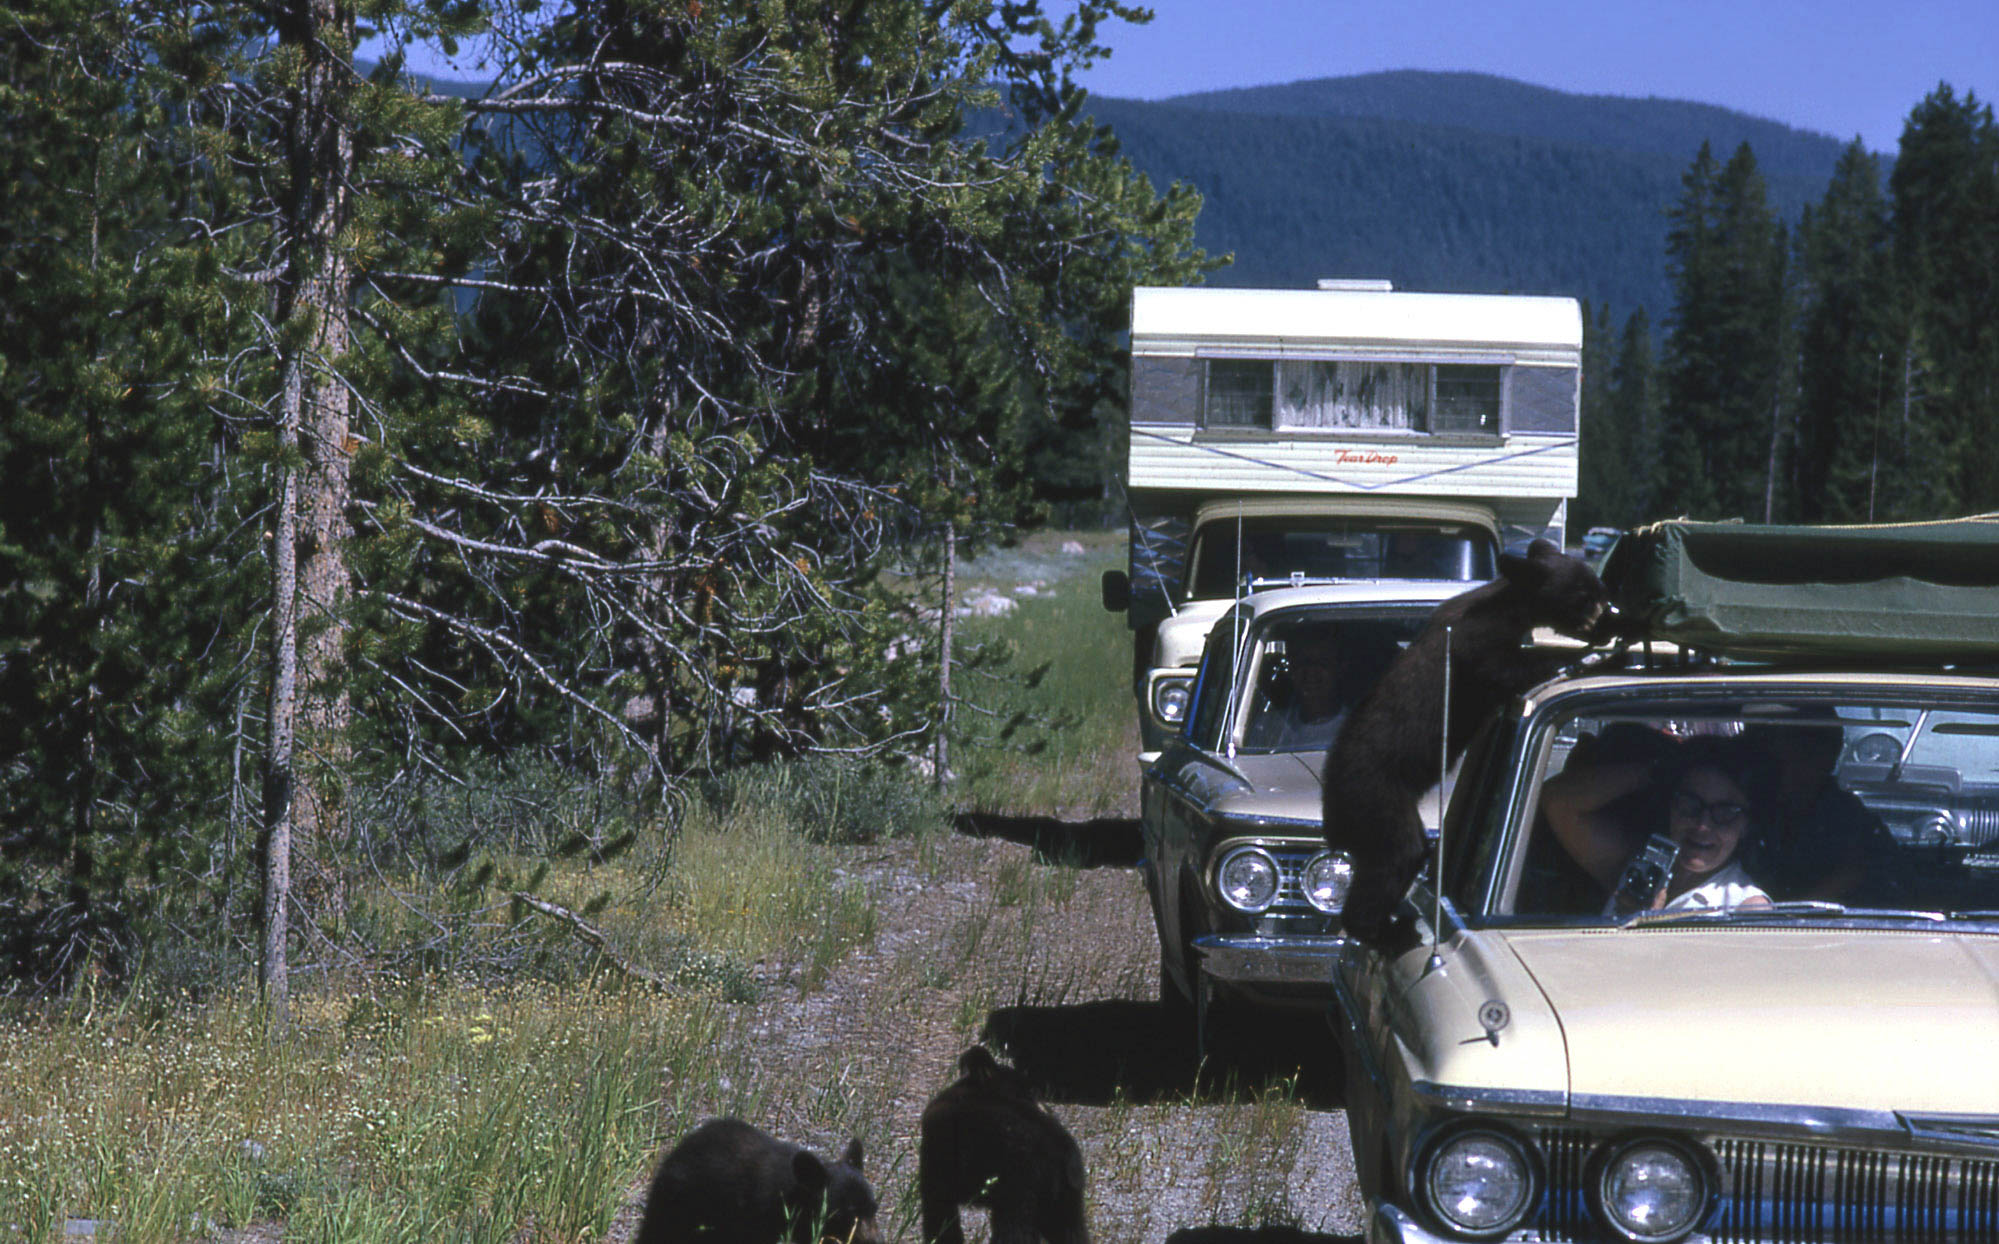 Three black bear cubs by cars, one is climbing on car